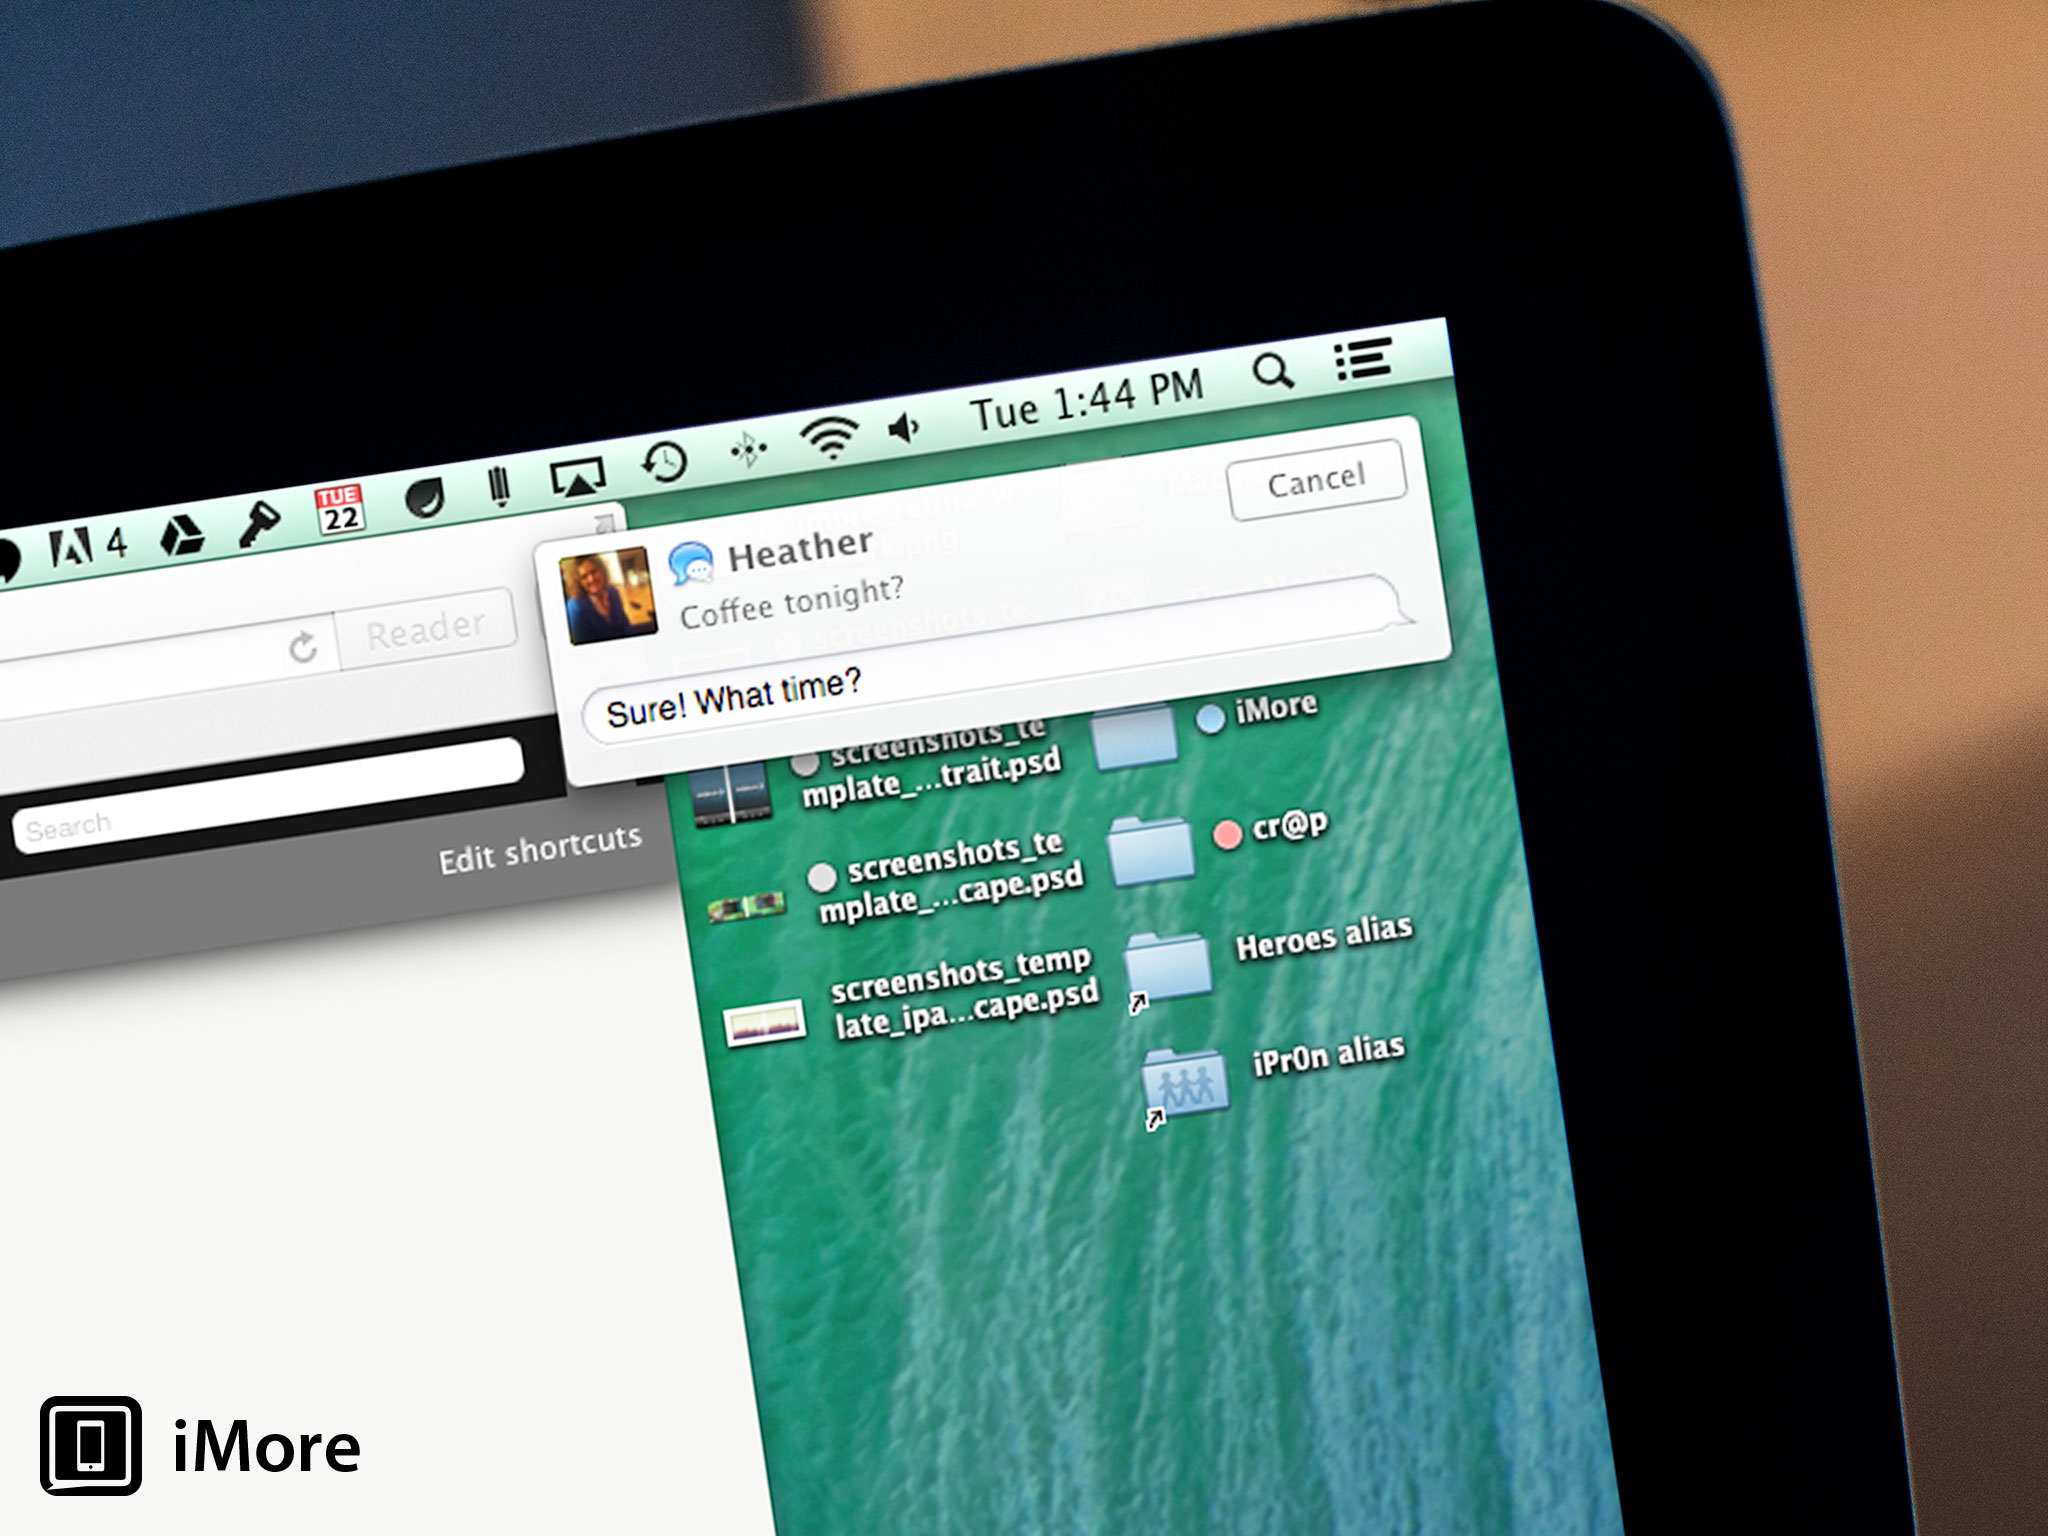 How to automatically add Facebook photos to your Contacts with OS X Mavericks